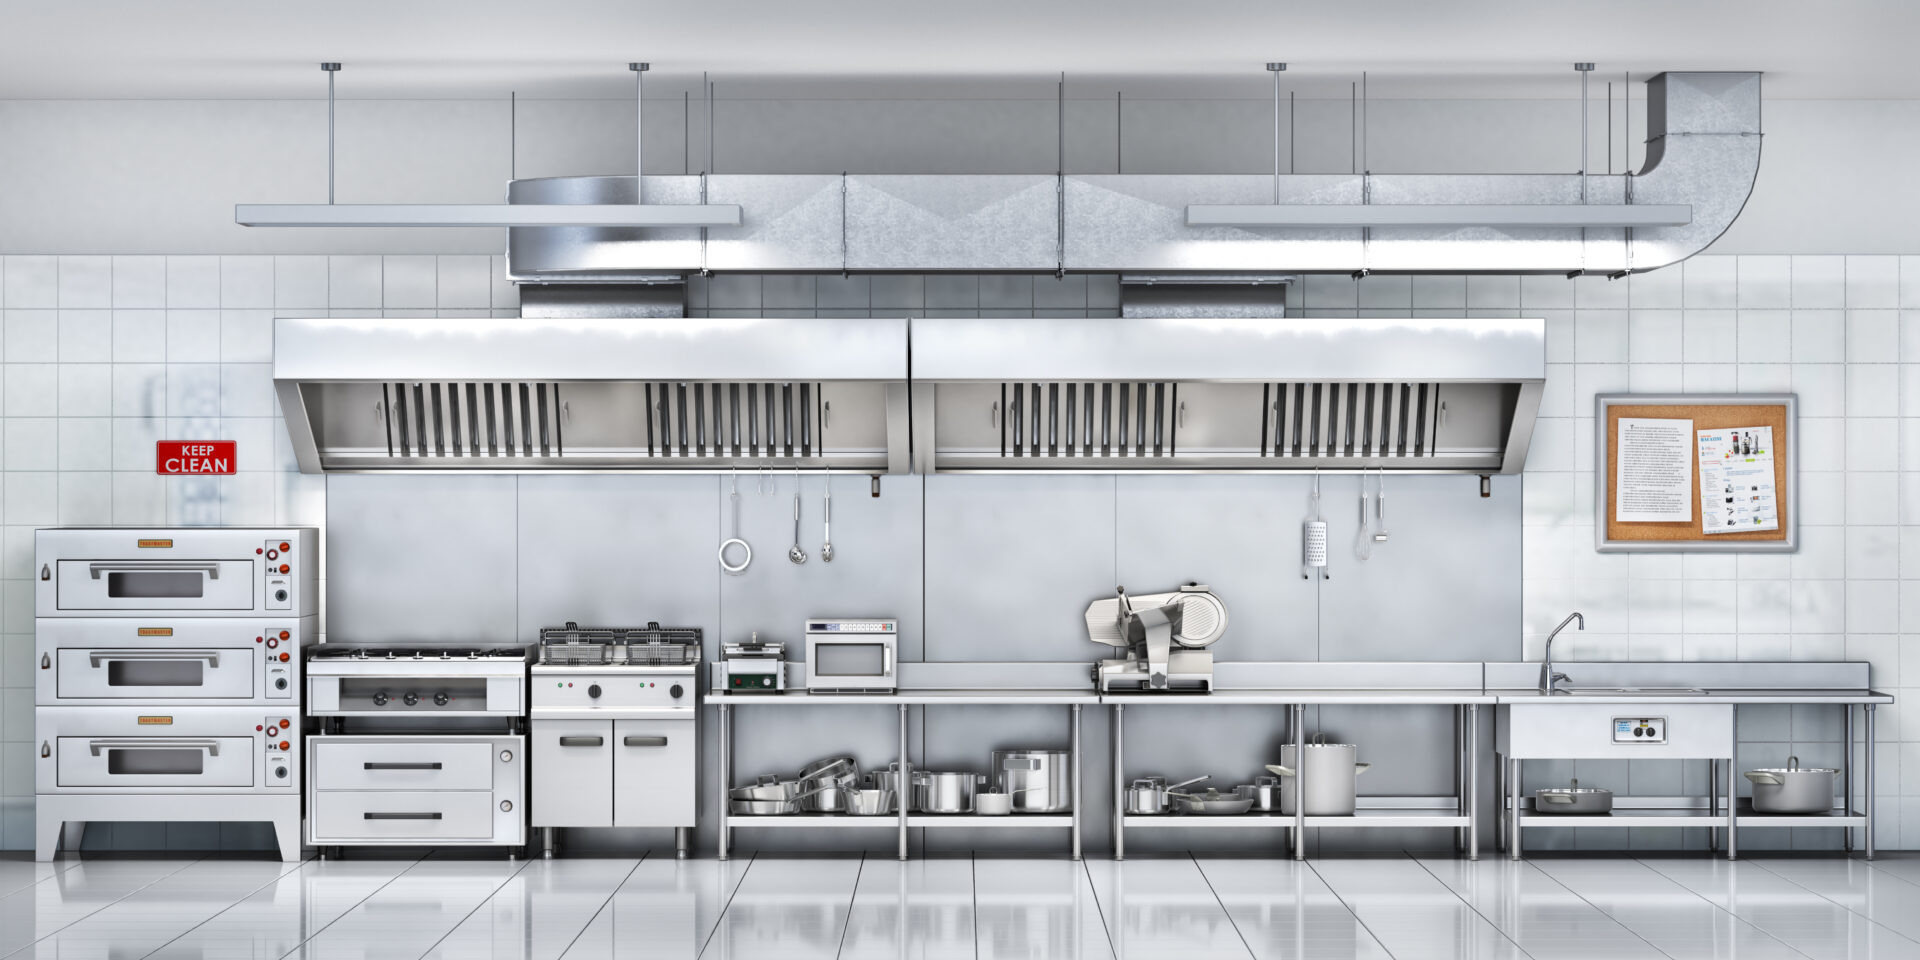 A kitchen with many stainless steel appliances and shelves.